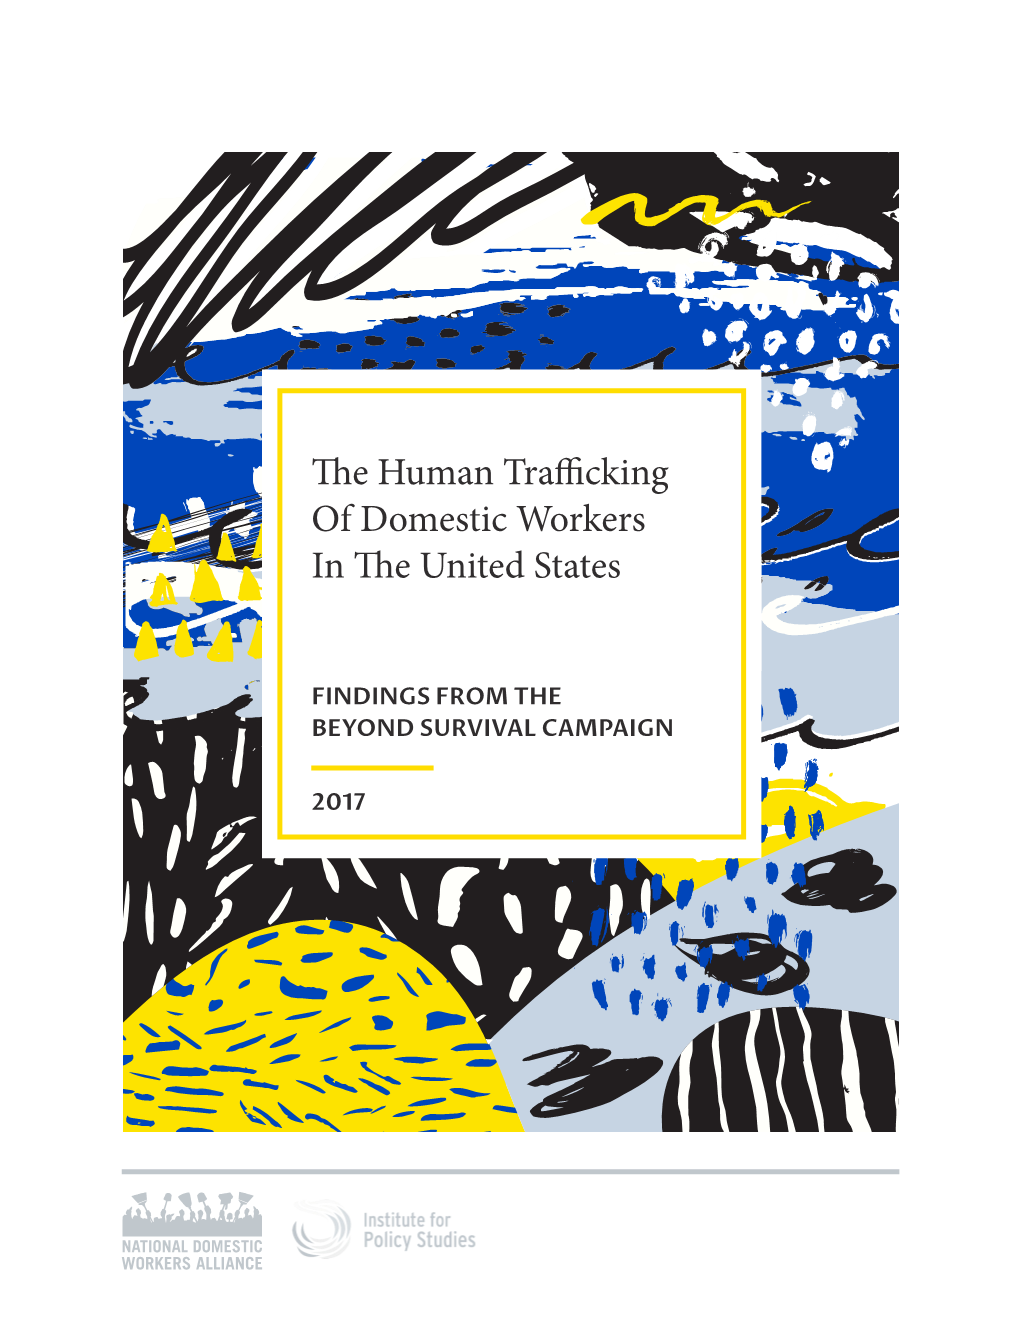 The Human Trafficking of Domestic Workers in the United States